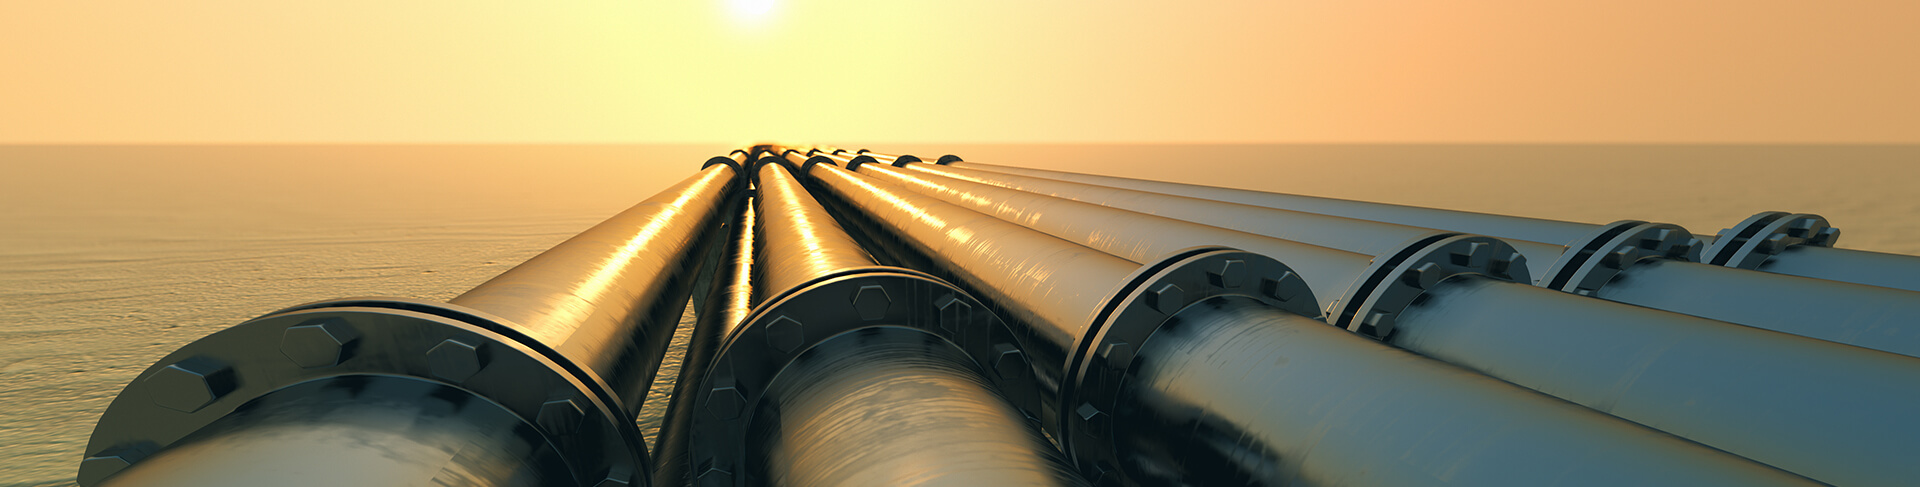 oil-pipes